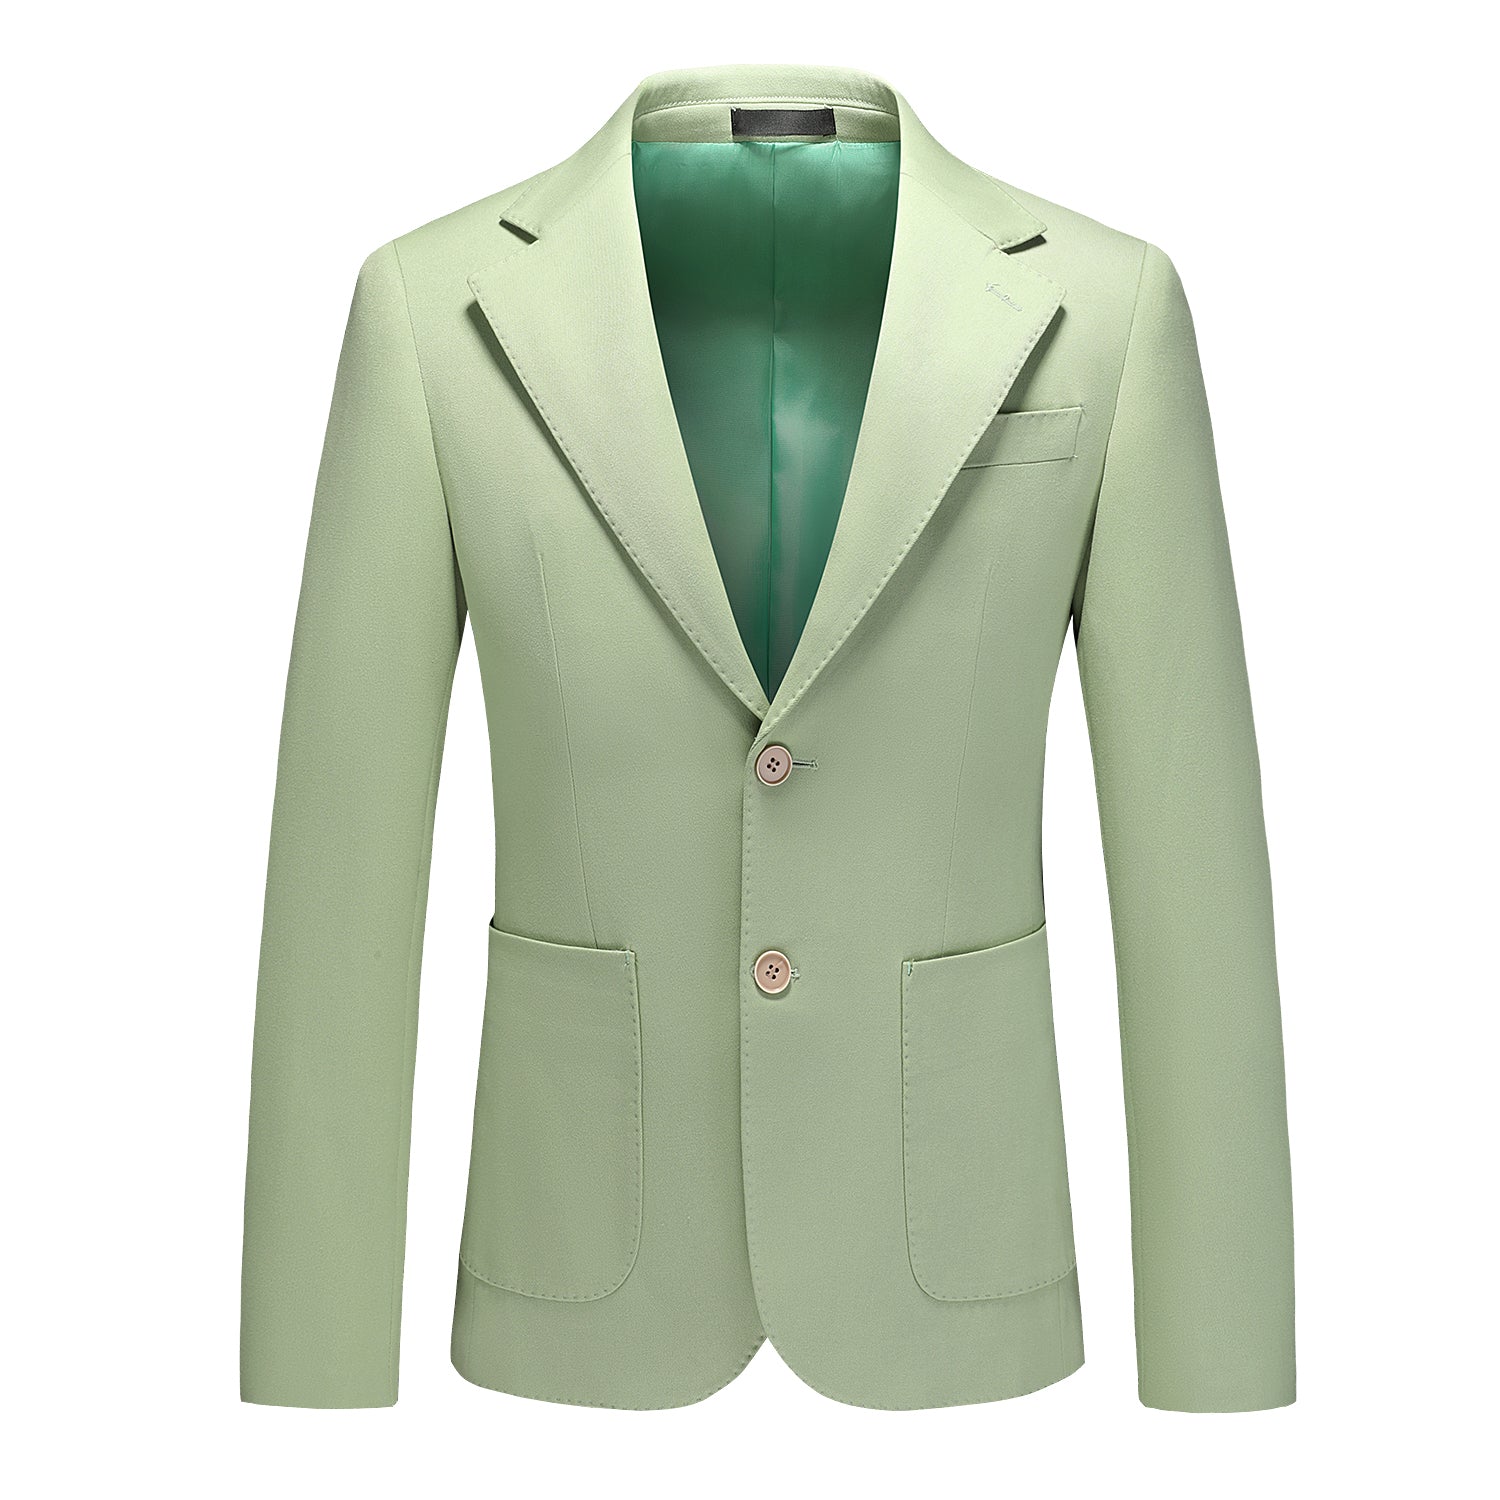 Men's Two Buttons Blazer Casual Suit jackets in Green